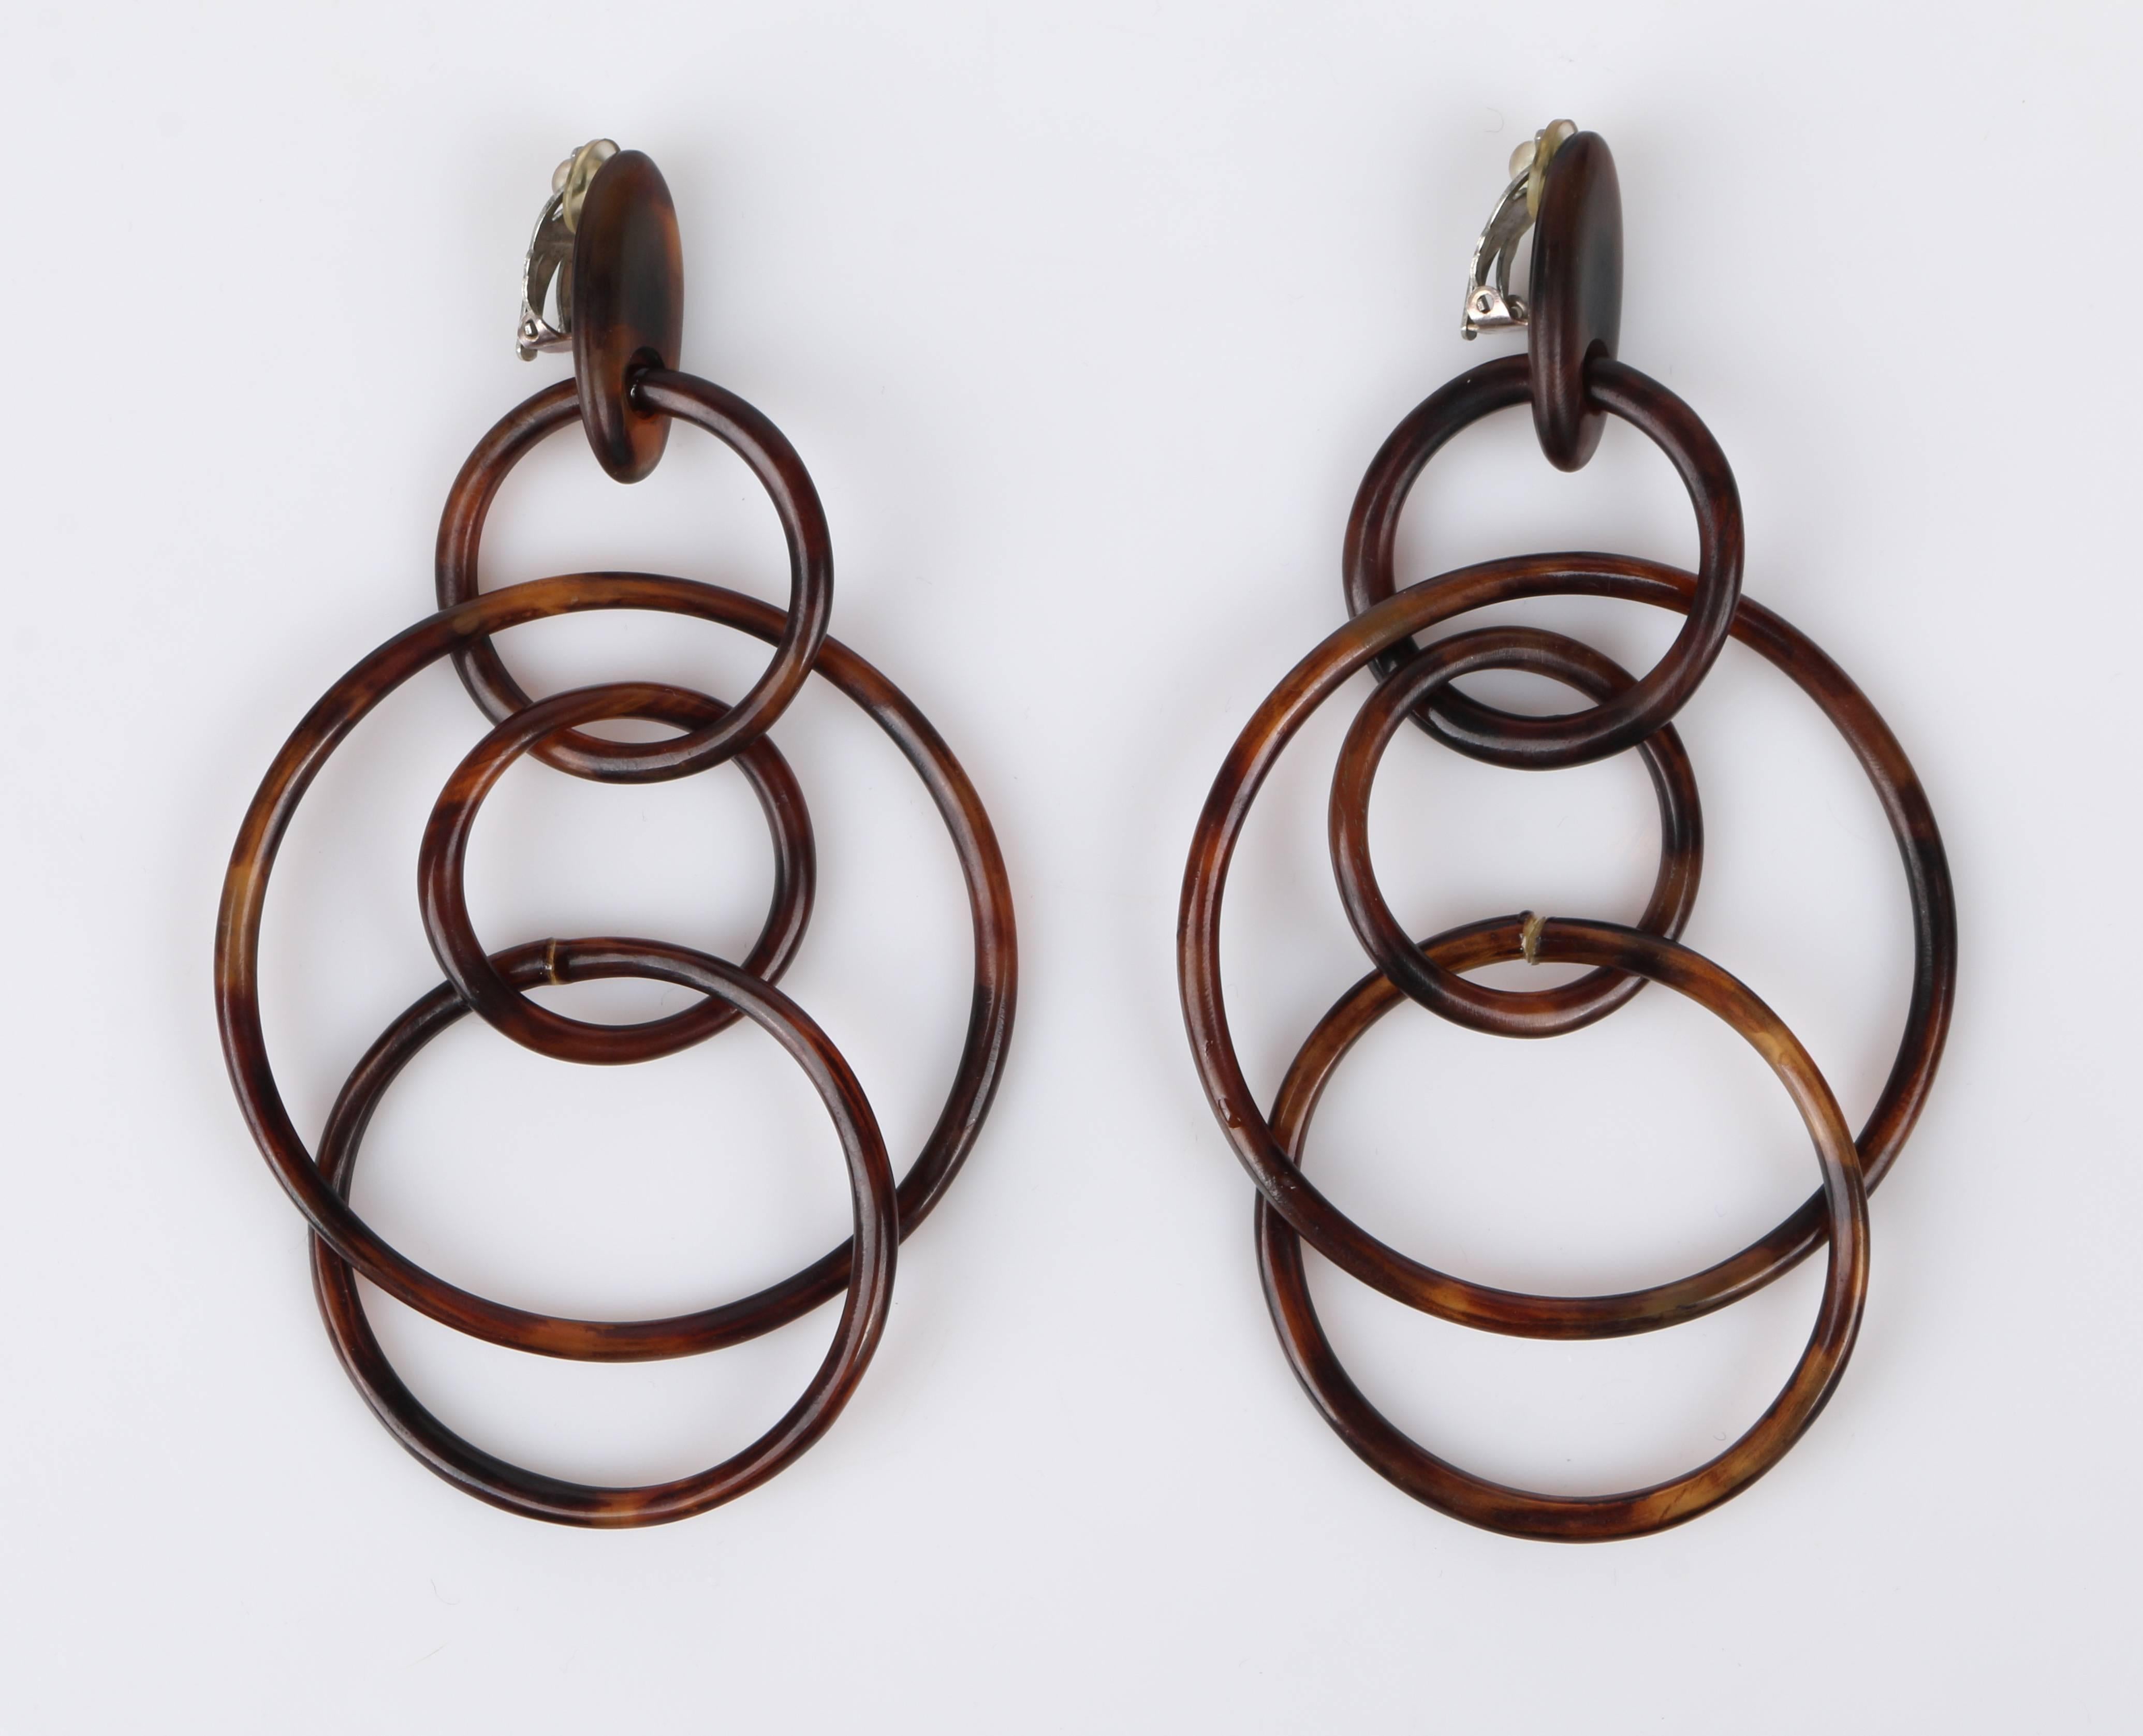 Vintage c.1970's Monies huge statement multi-hoop linked clip on earrings. Multi-hoop linked earrings appear to be made of brown horn/resin material with a tortoise shell pattern. Four hoops are linked to form 3 dimensional dangles.  Hoop dangles